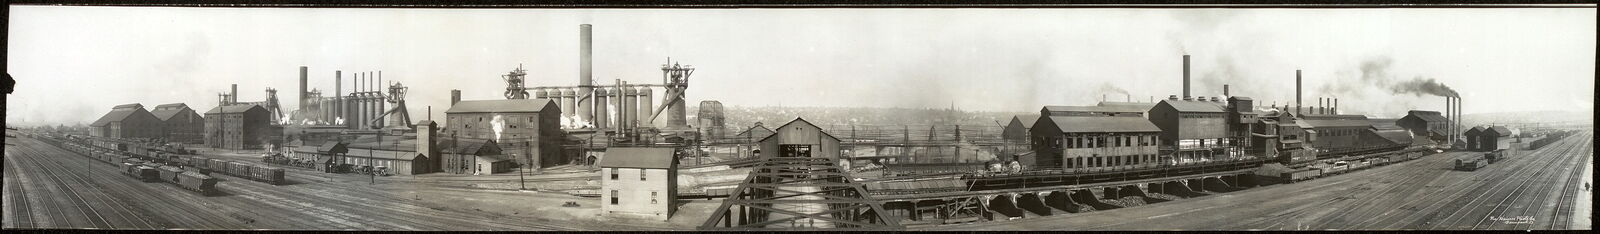 1910 Panoramic: Ohio Works of the Carnegie Steel Company,Youngstown,Ohio